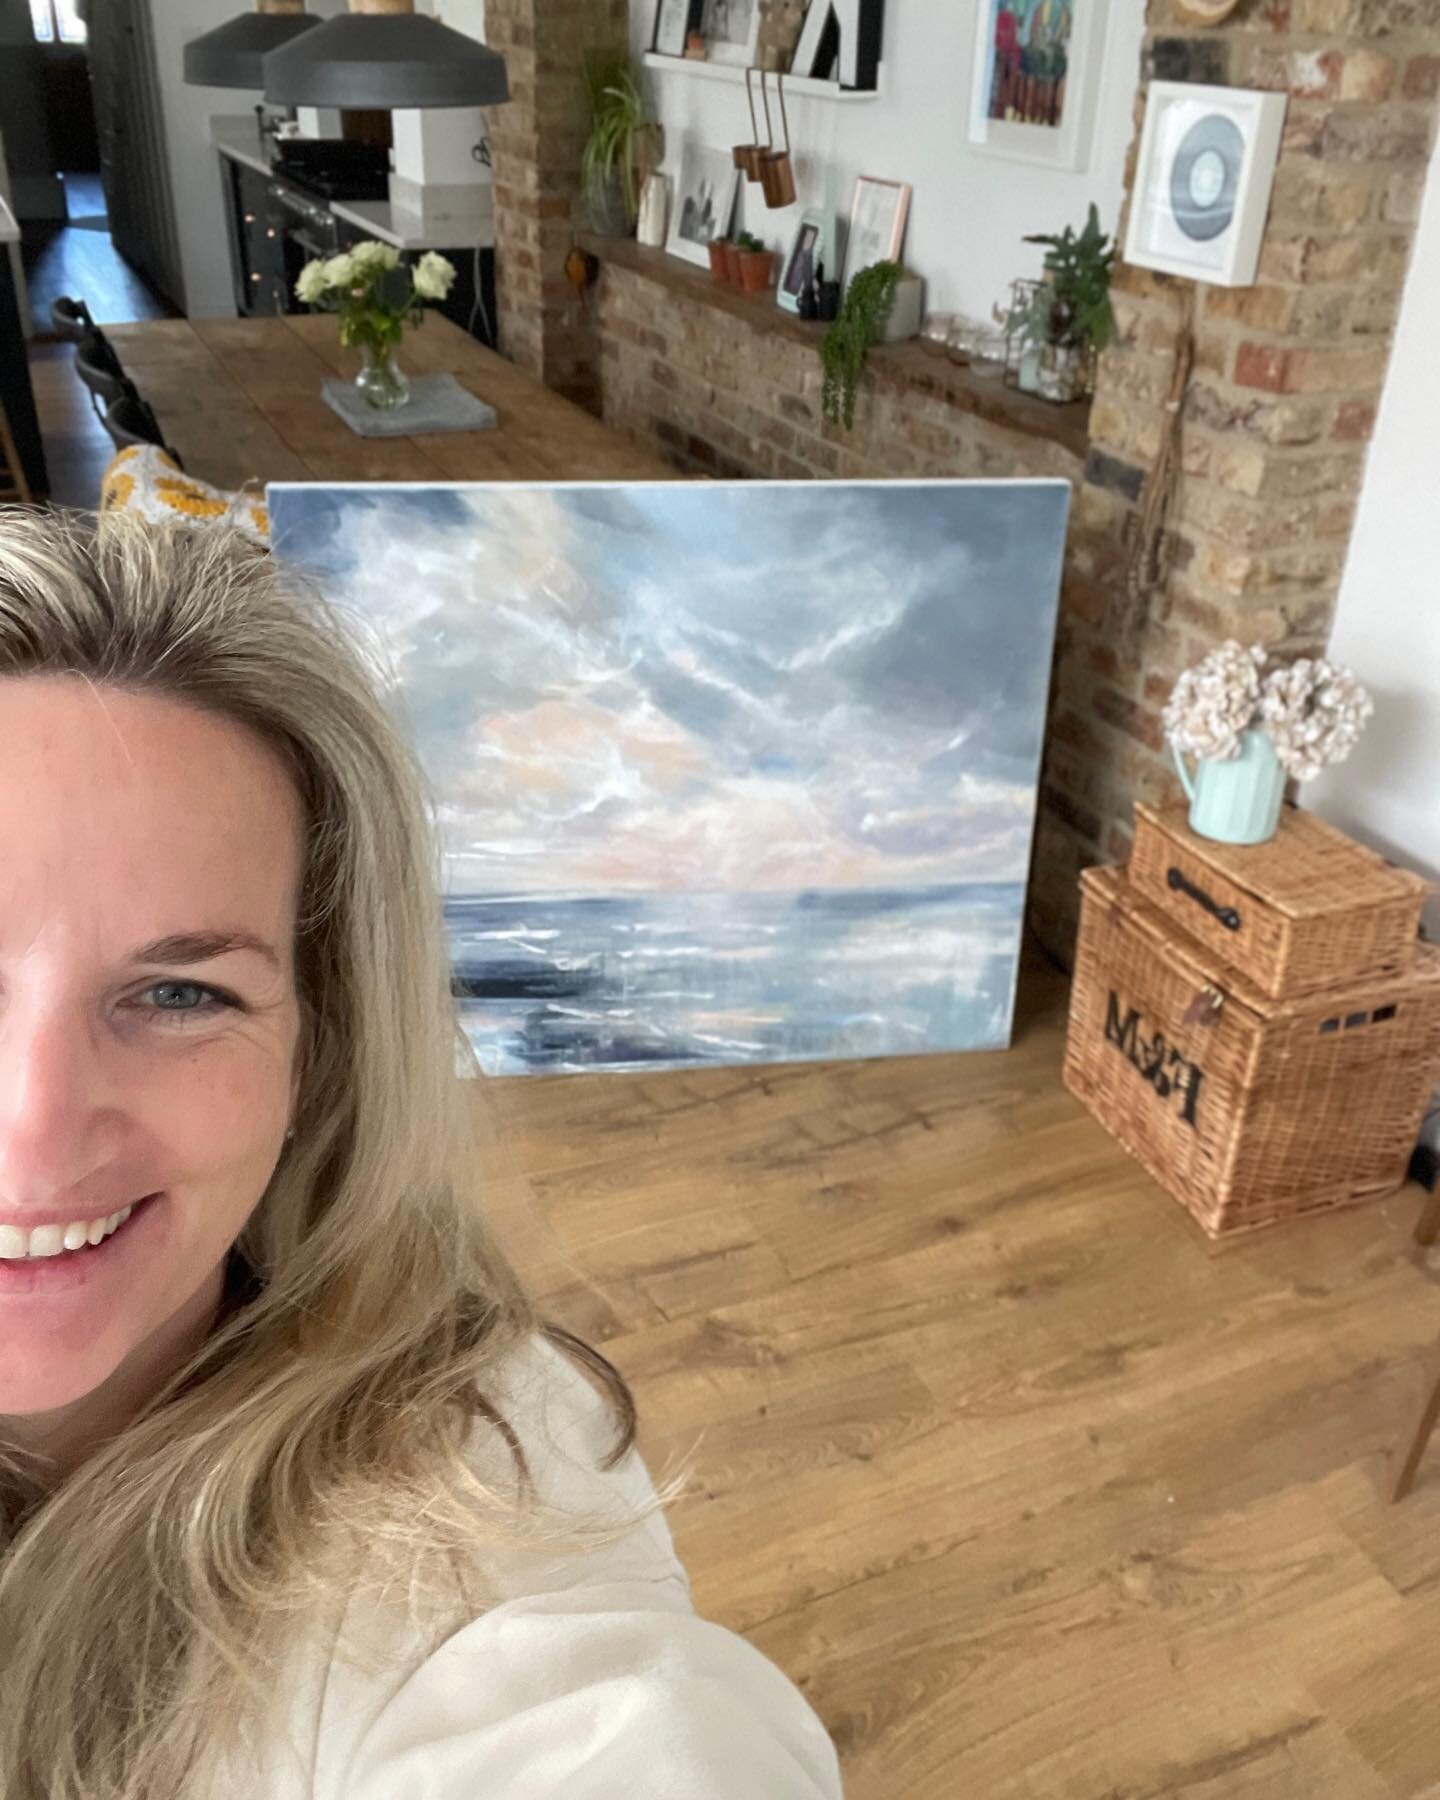 Happy face! 🙌🏻 Delivering my last commission for this year! Books will reopen in 2024! 💫 

#artforthehome #commissionedart #happyface #womenwhopaint #artforbreakfast #connectedartists #bigcanvaspainting #canvaspainting #hopeful #skyscape #hoveactu